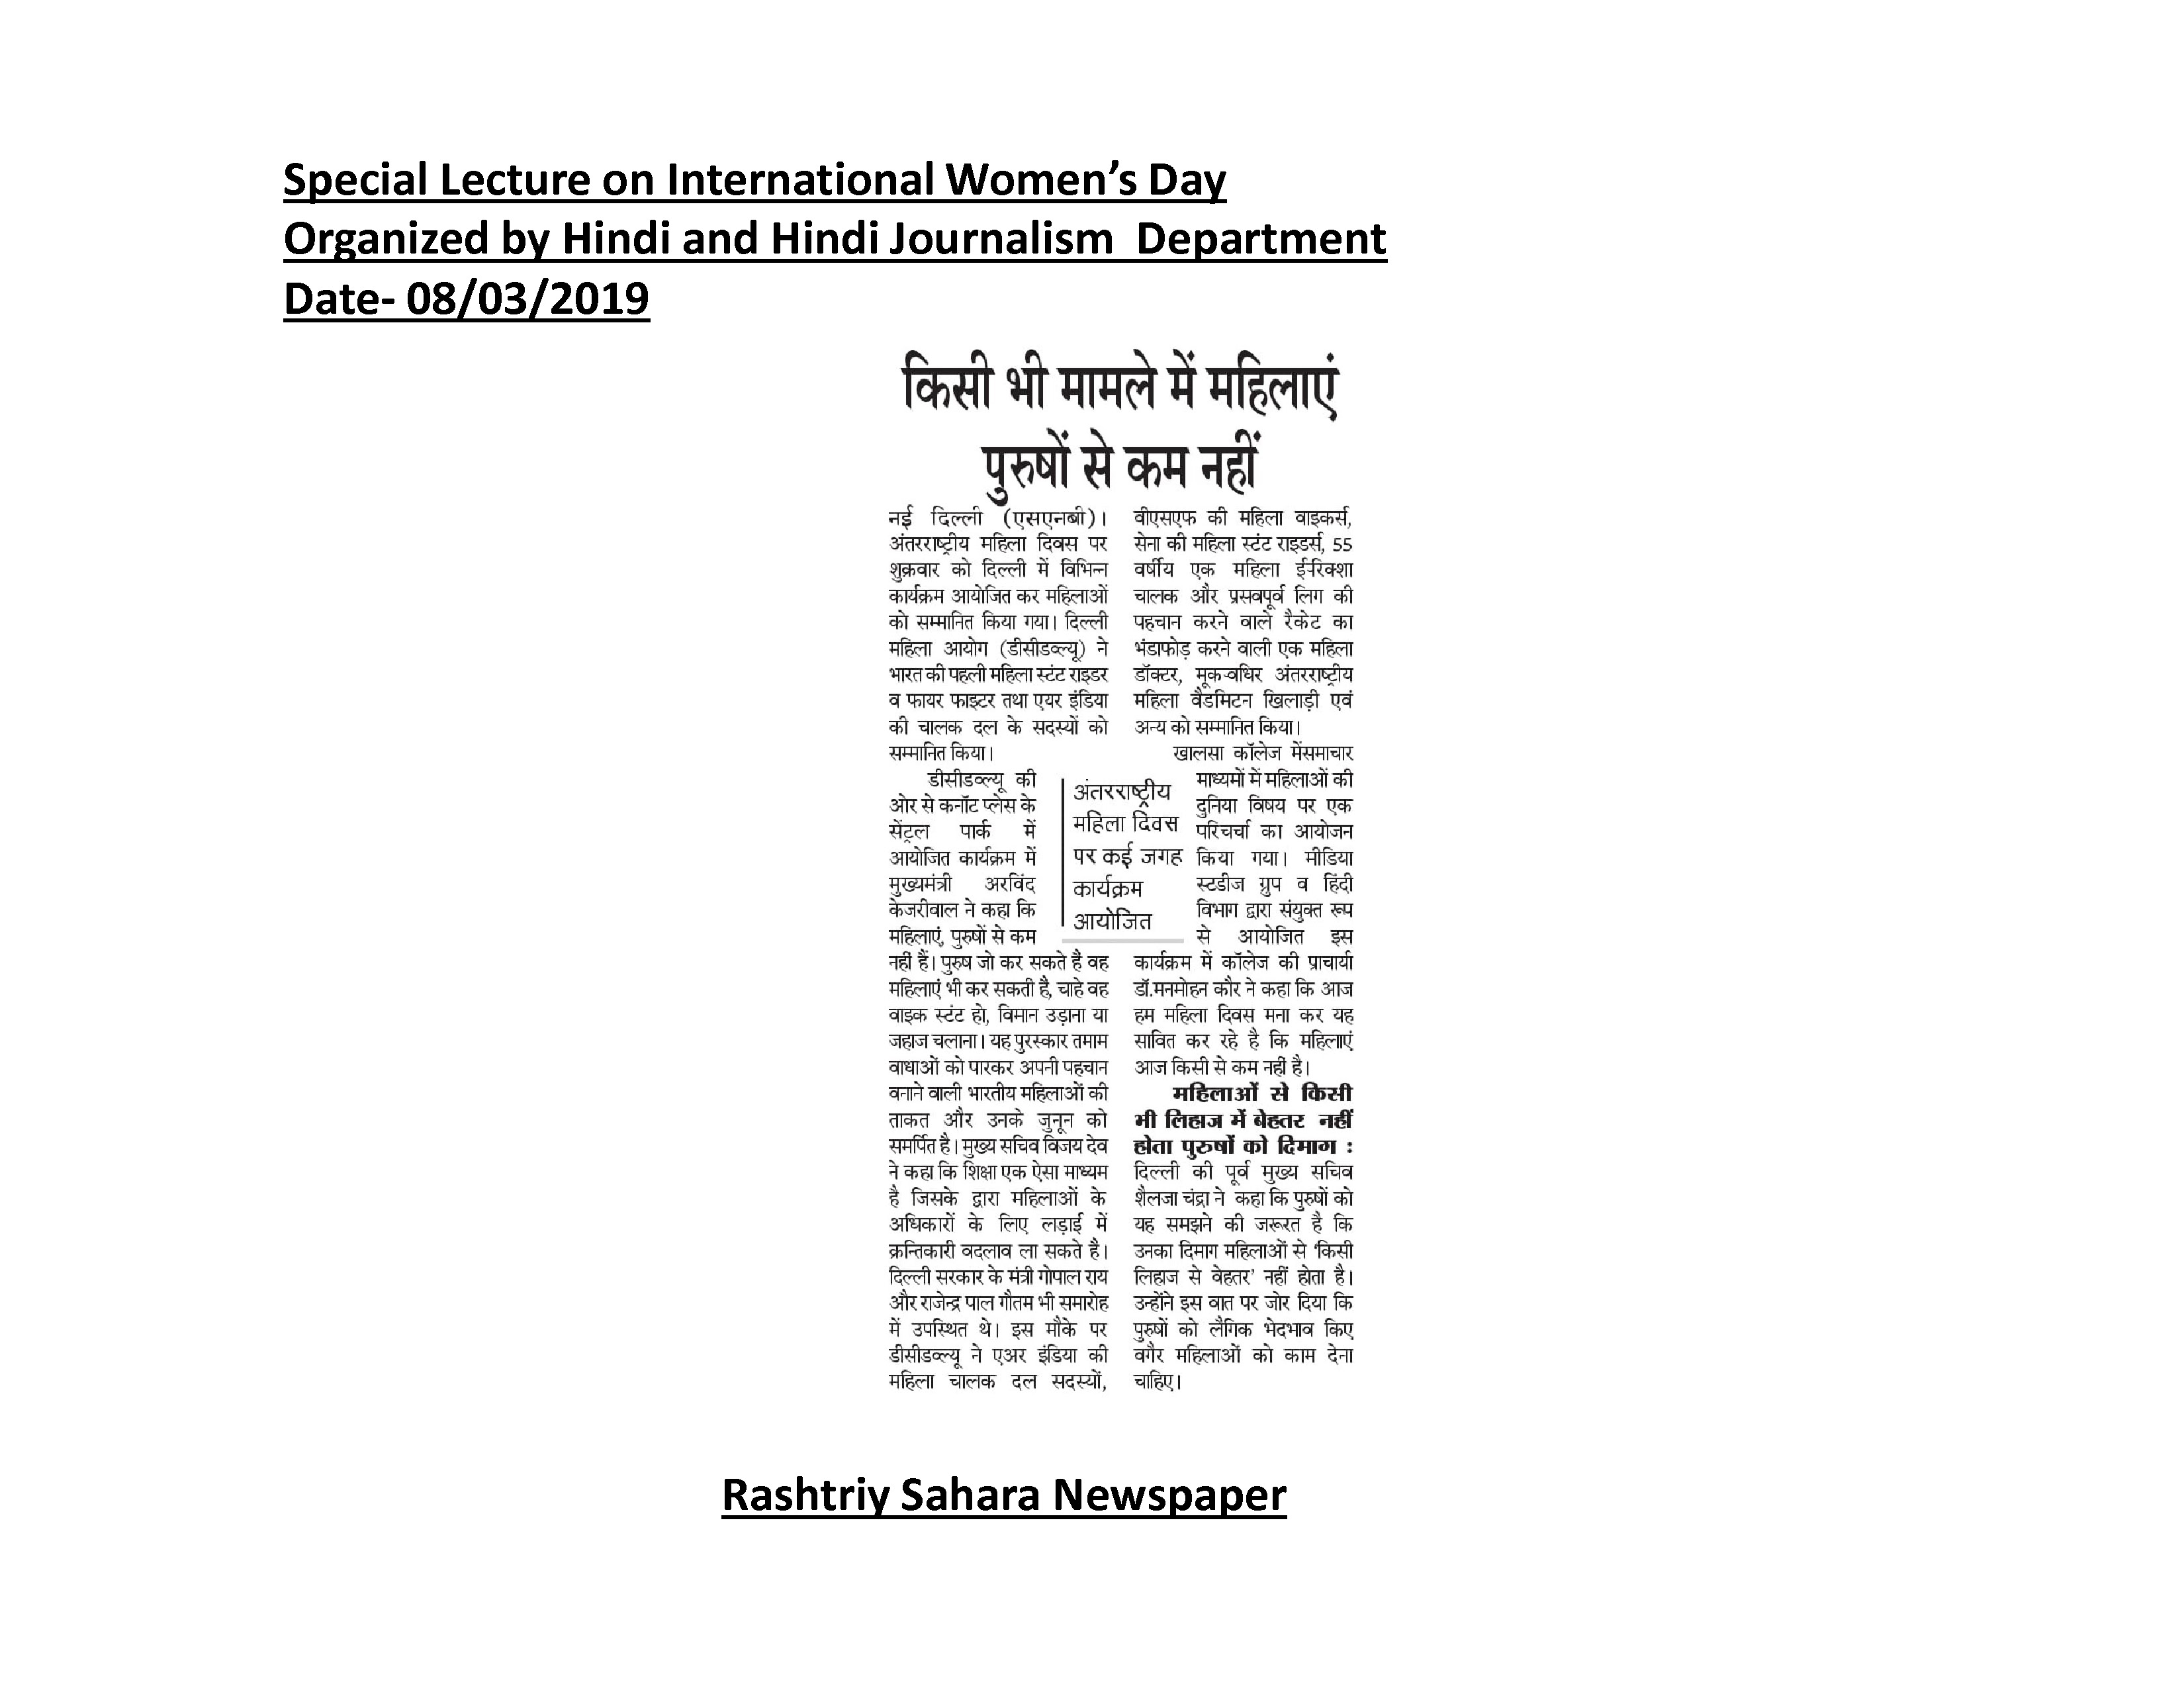 images/mediaspeaks/press clipping_Page_43.jpg